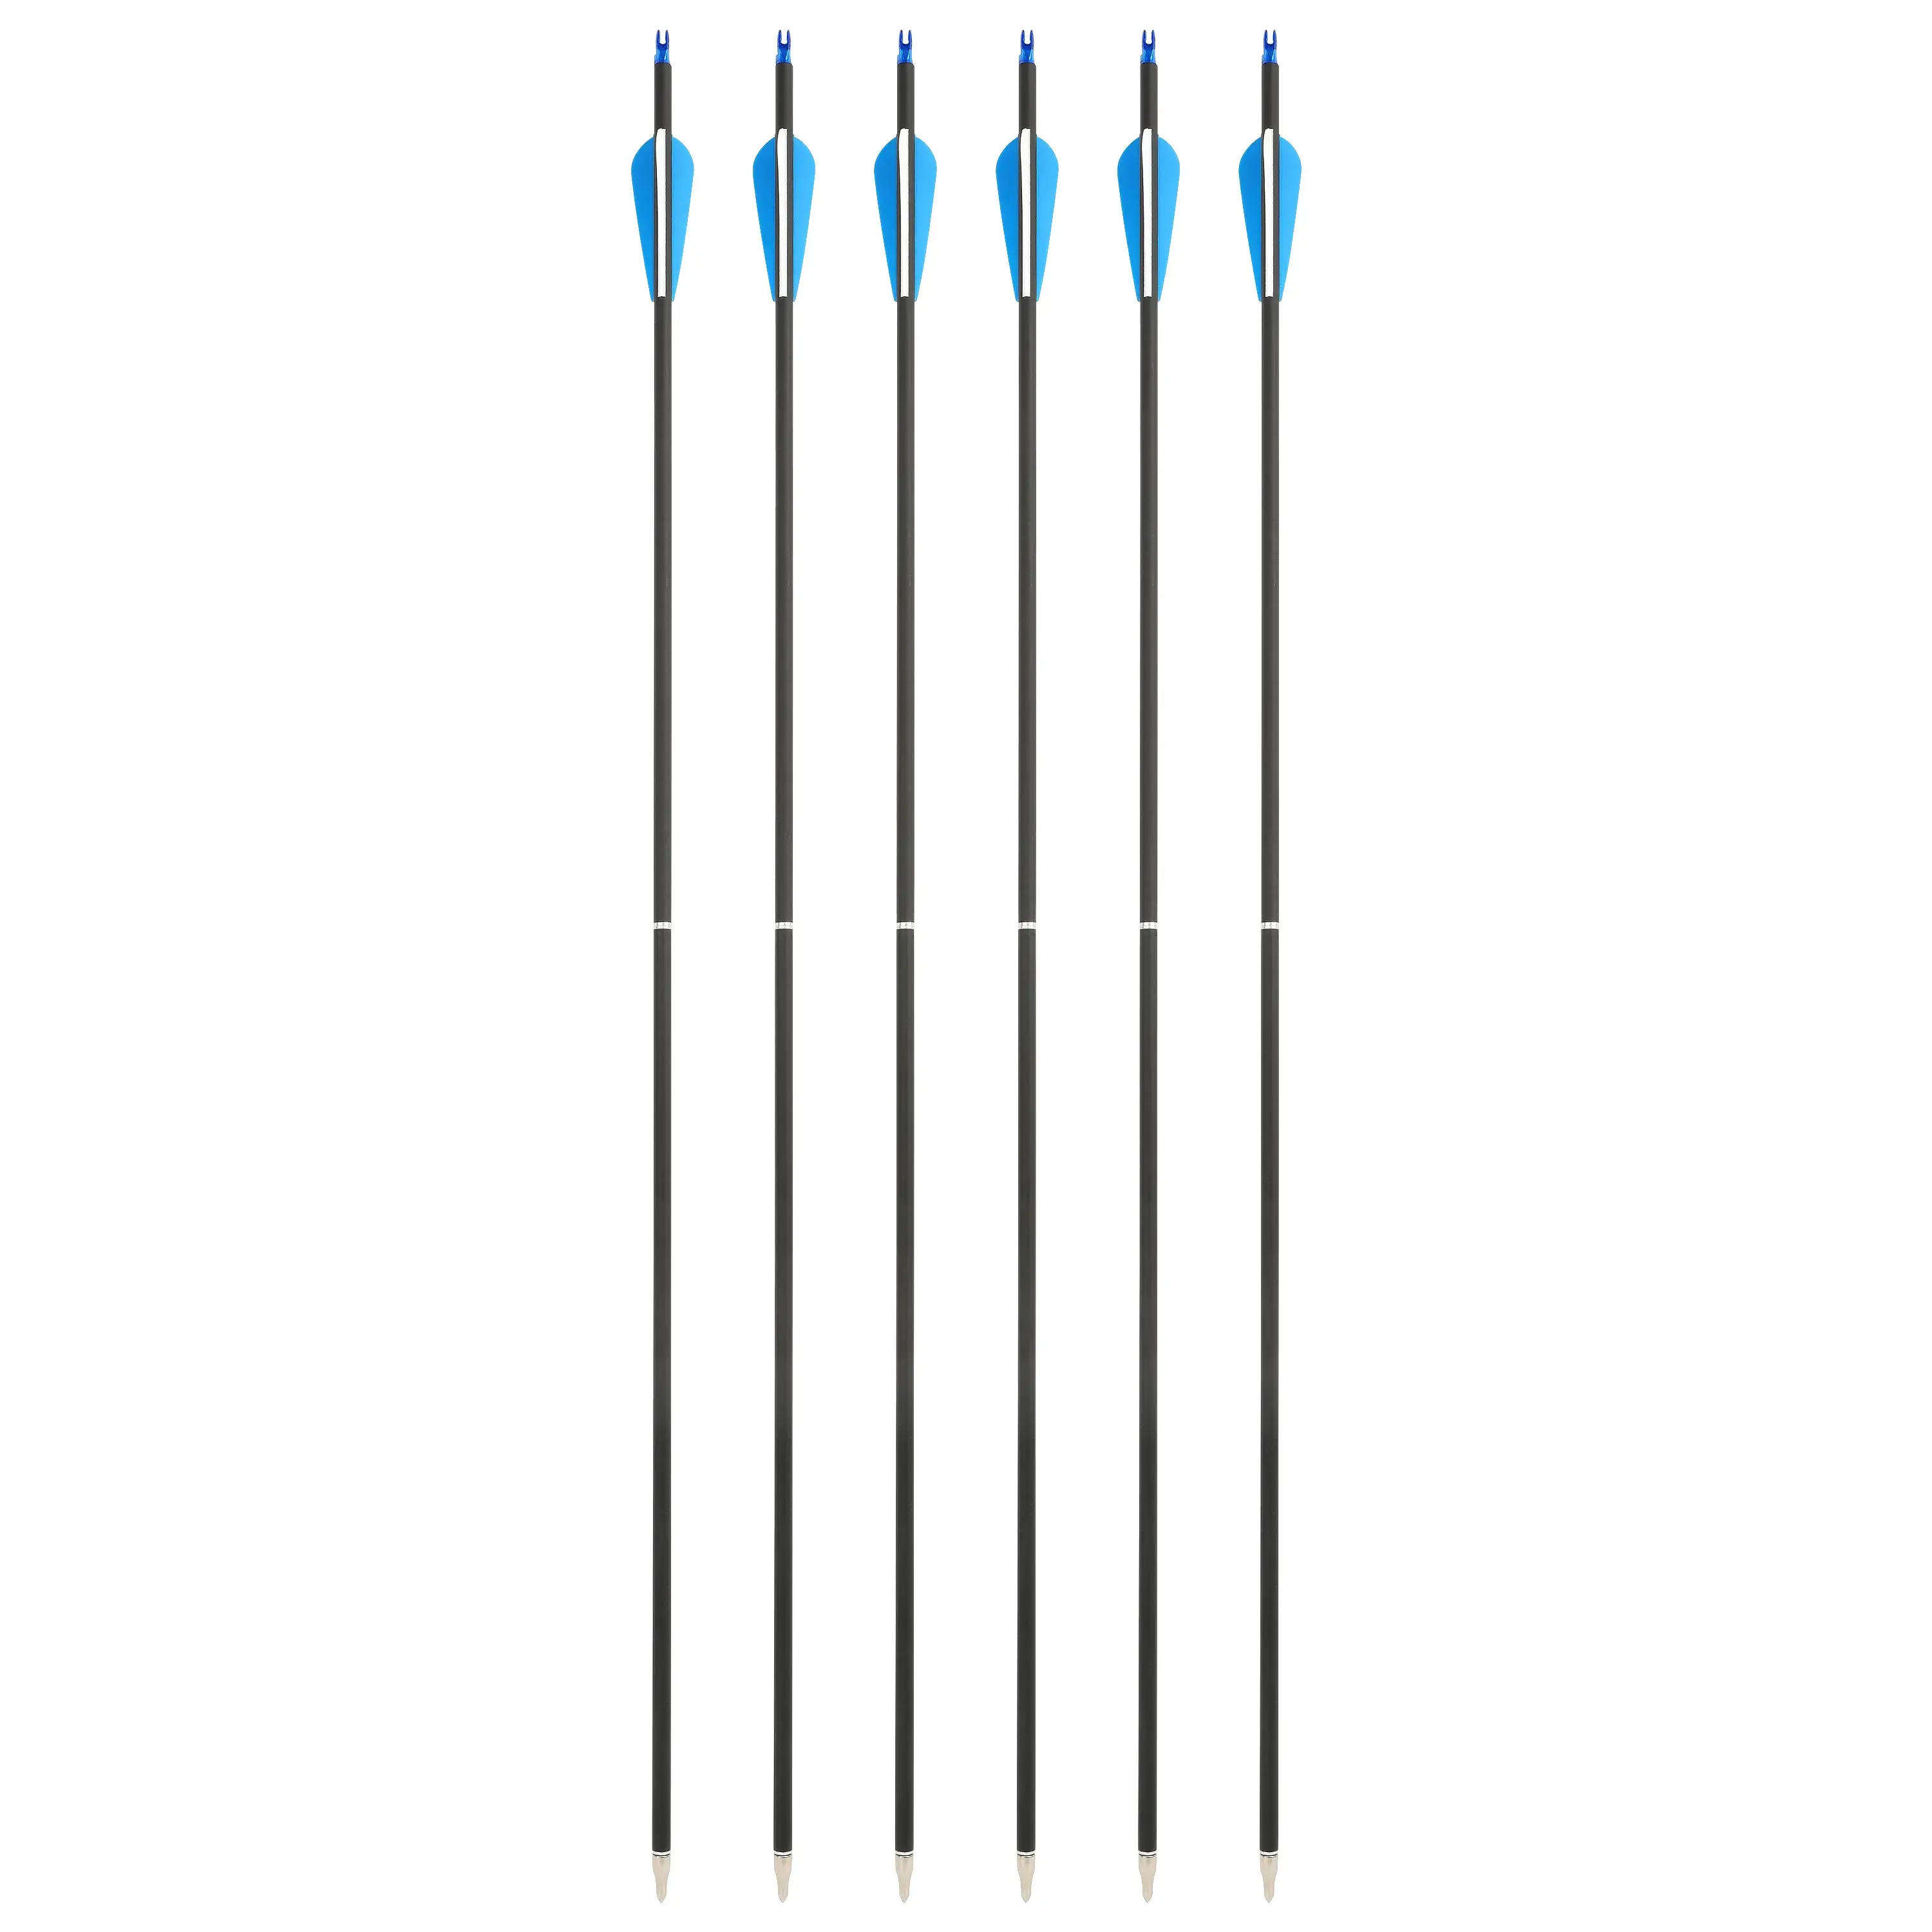 Carbon Takedown Arrows 30 Spine 500 SHARROW (6 Pack)